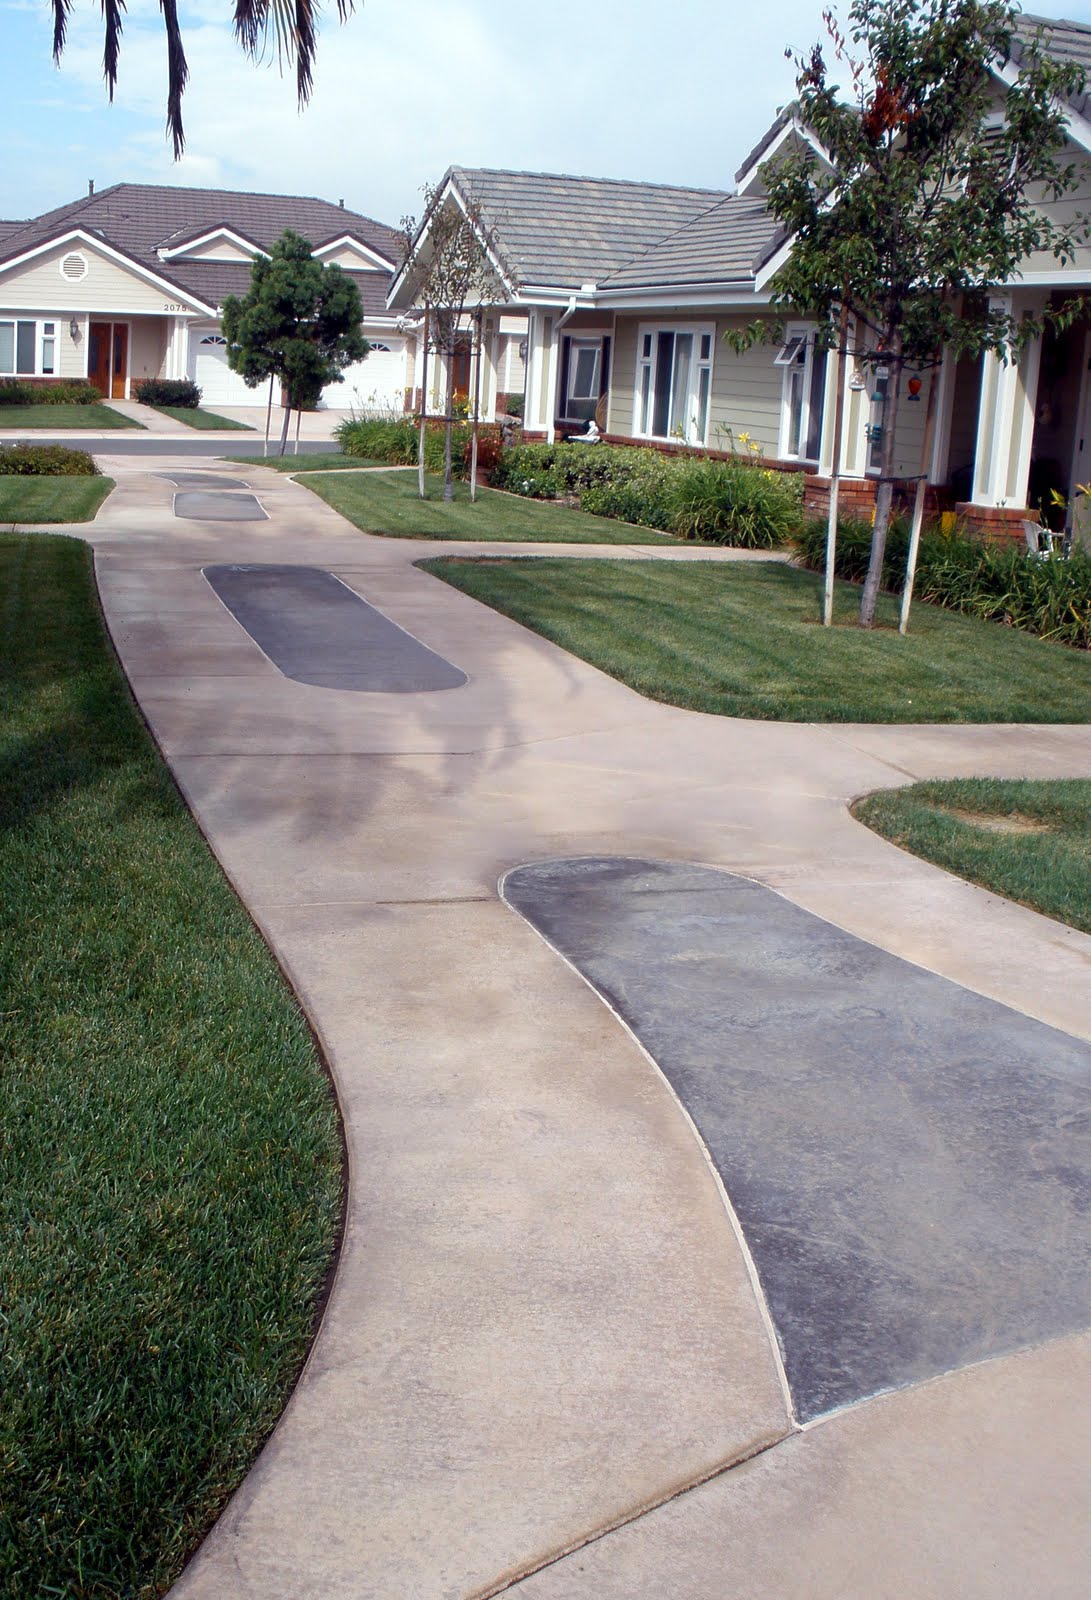 This concrete sidewalk was integrally colored with Davis Colors' Padre Brown with a Walnut release agent and Davis Colors' Meadowbrook Brown (custom color). The colored concrete was supplied by Superior Ready Mix (www.superiorrm.com).